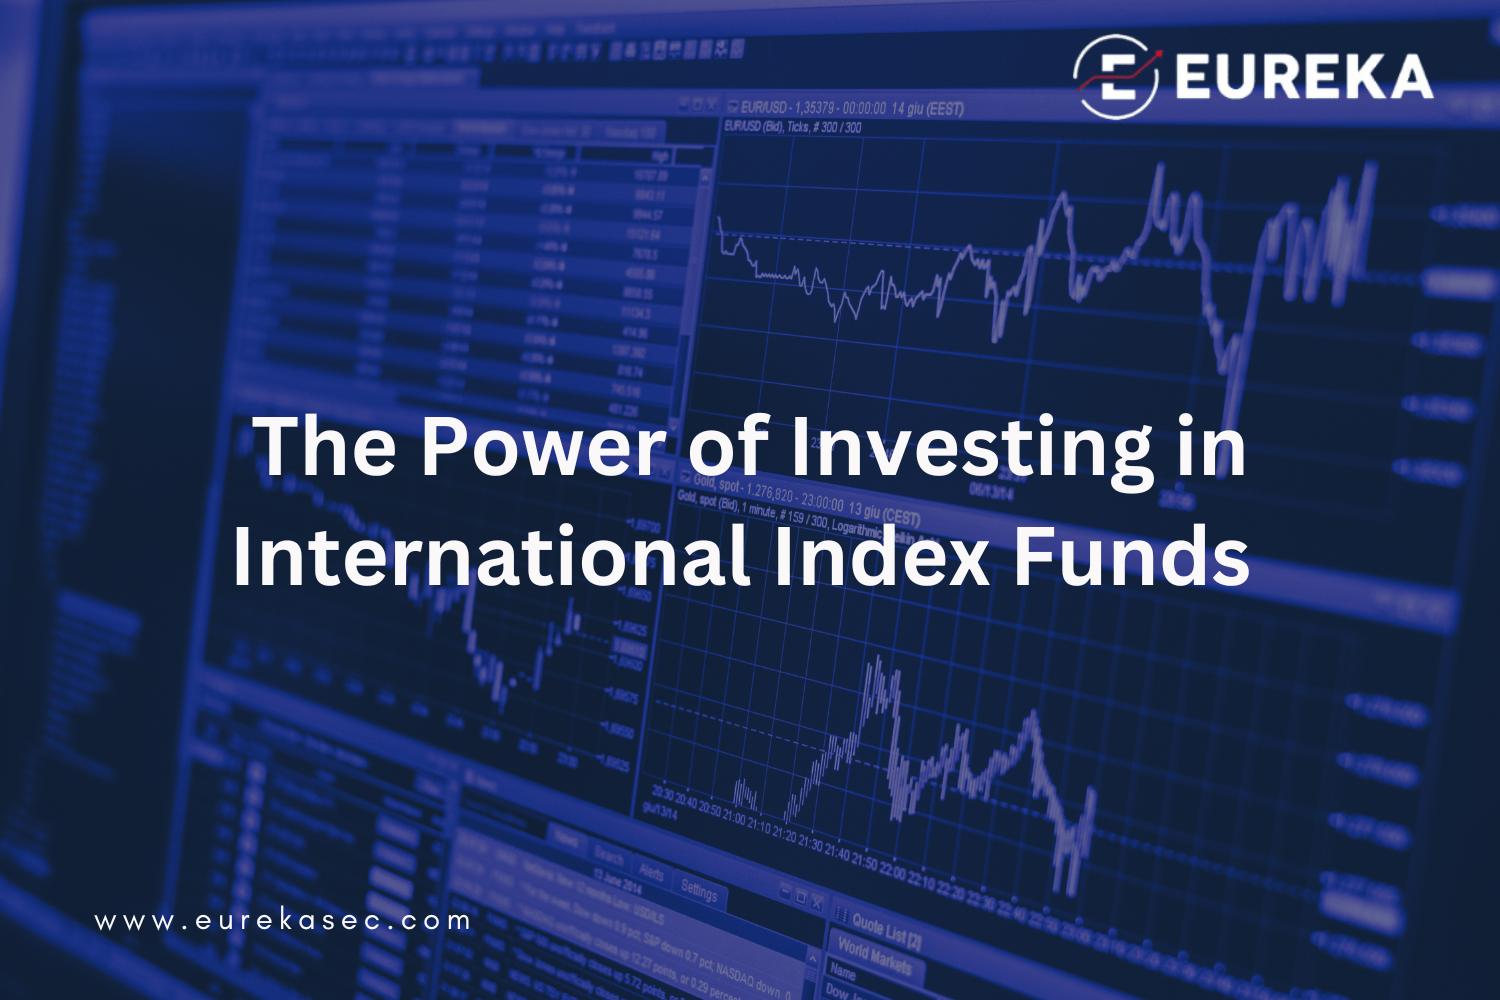 Broadening Horizons: The Power of Investing in International Index Funds